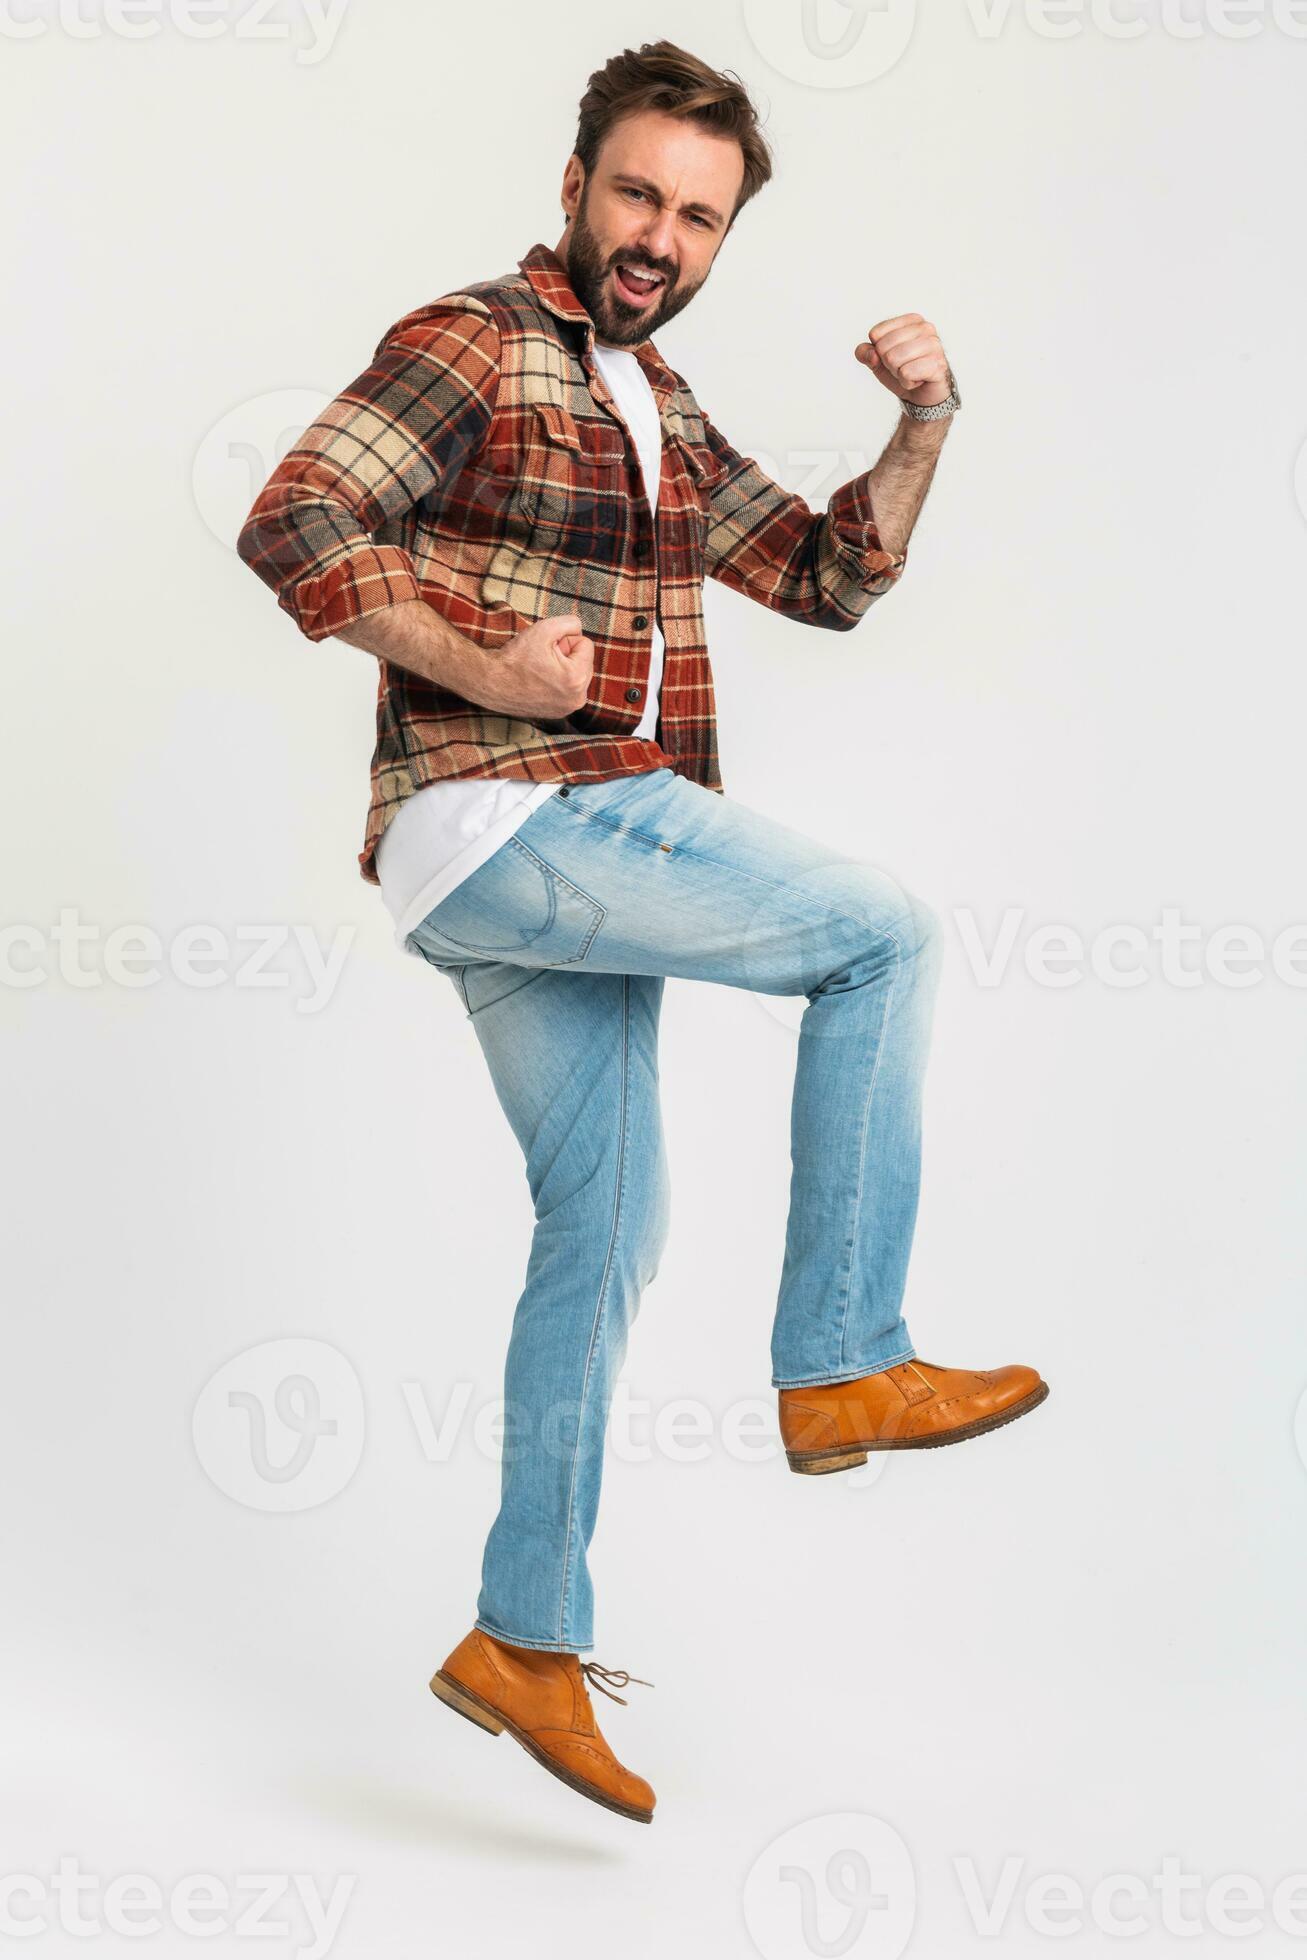 https://static.vecteezy.com/system/resources/previews/029/067/472/large_2x/handsome-bearded-man-in-hipster-outfit-dressed-in-jeans-and-checkered-shirt-photo.jpg